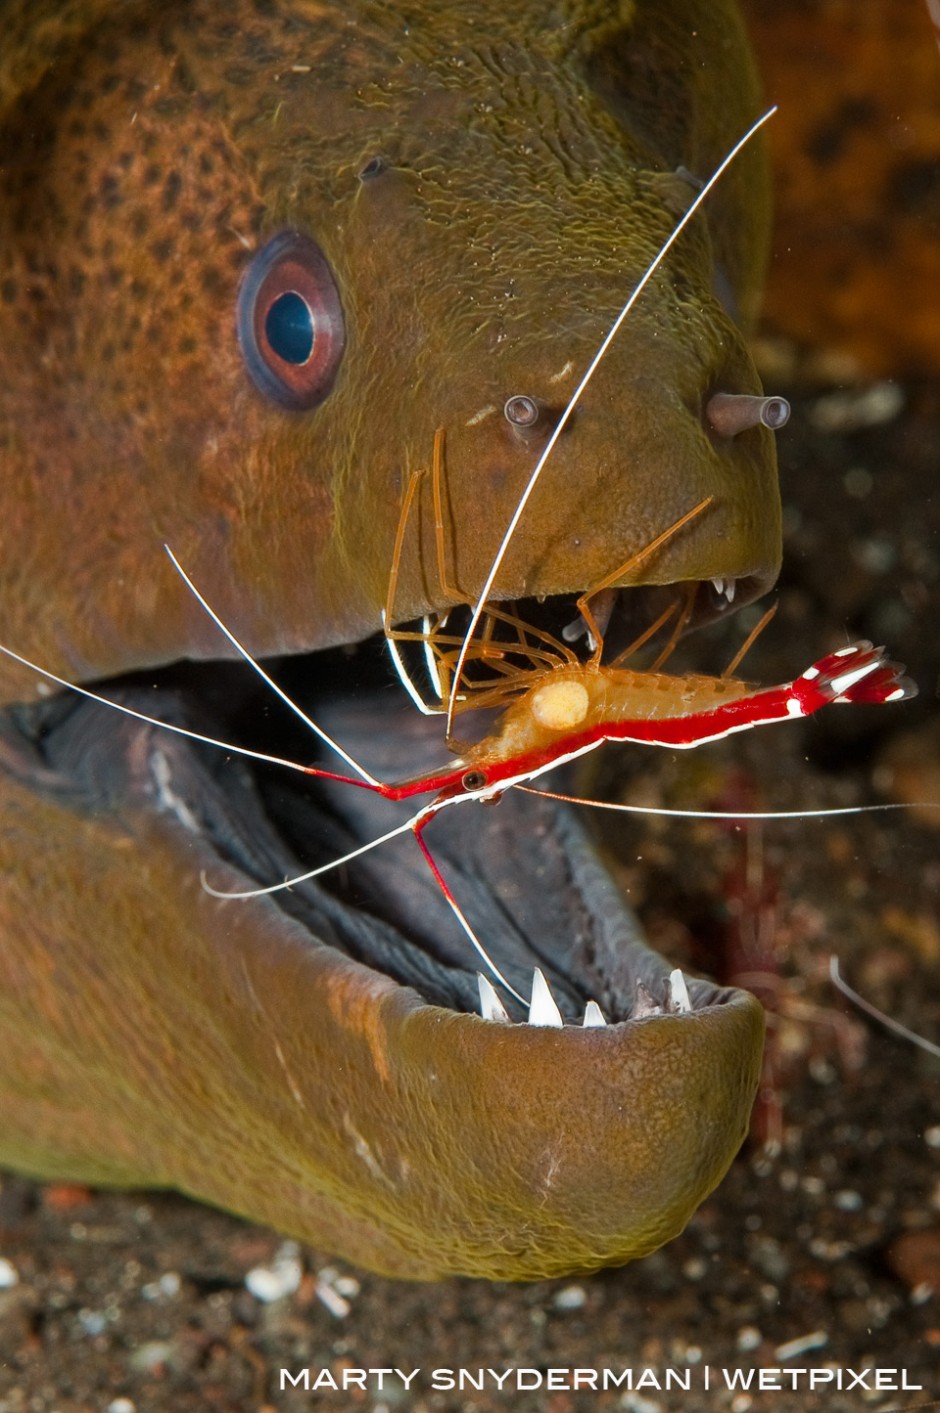 A yellow-margin moray eel, *Gymnothorax flavimarginatus*, getting cleaned by a scarlet cleaner shrimp, *Lysmata ambionensis*, in Indonesia